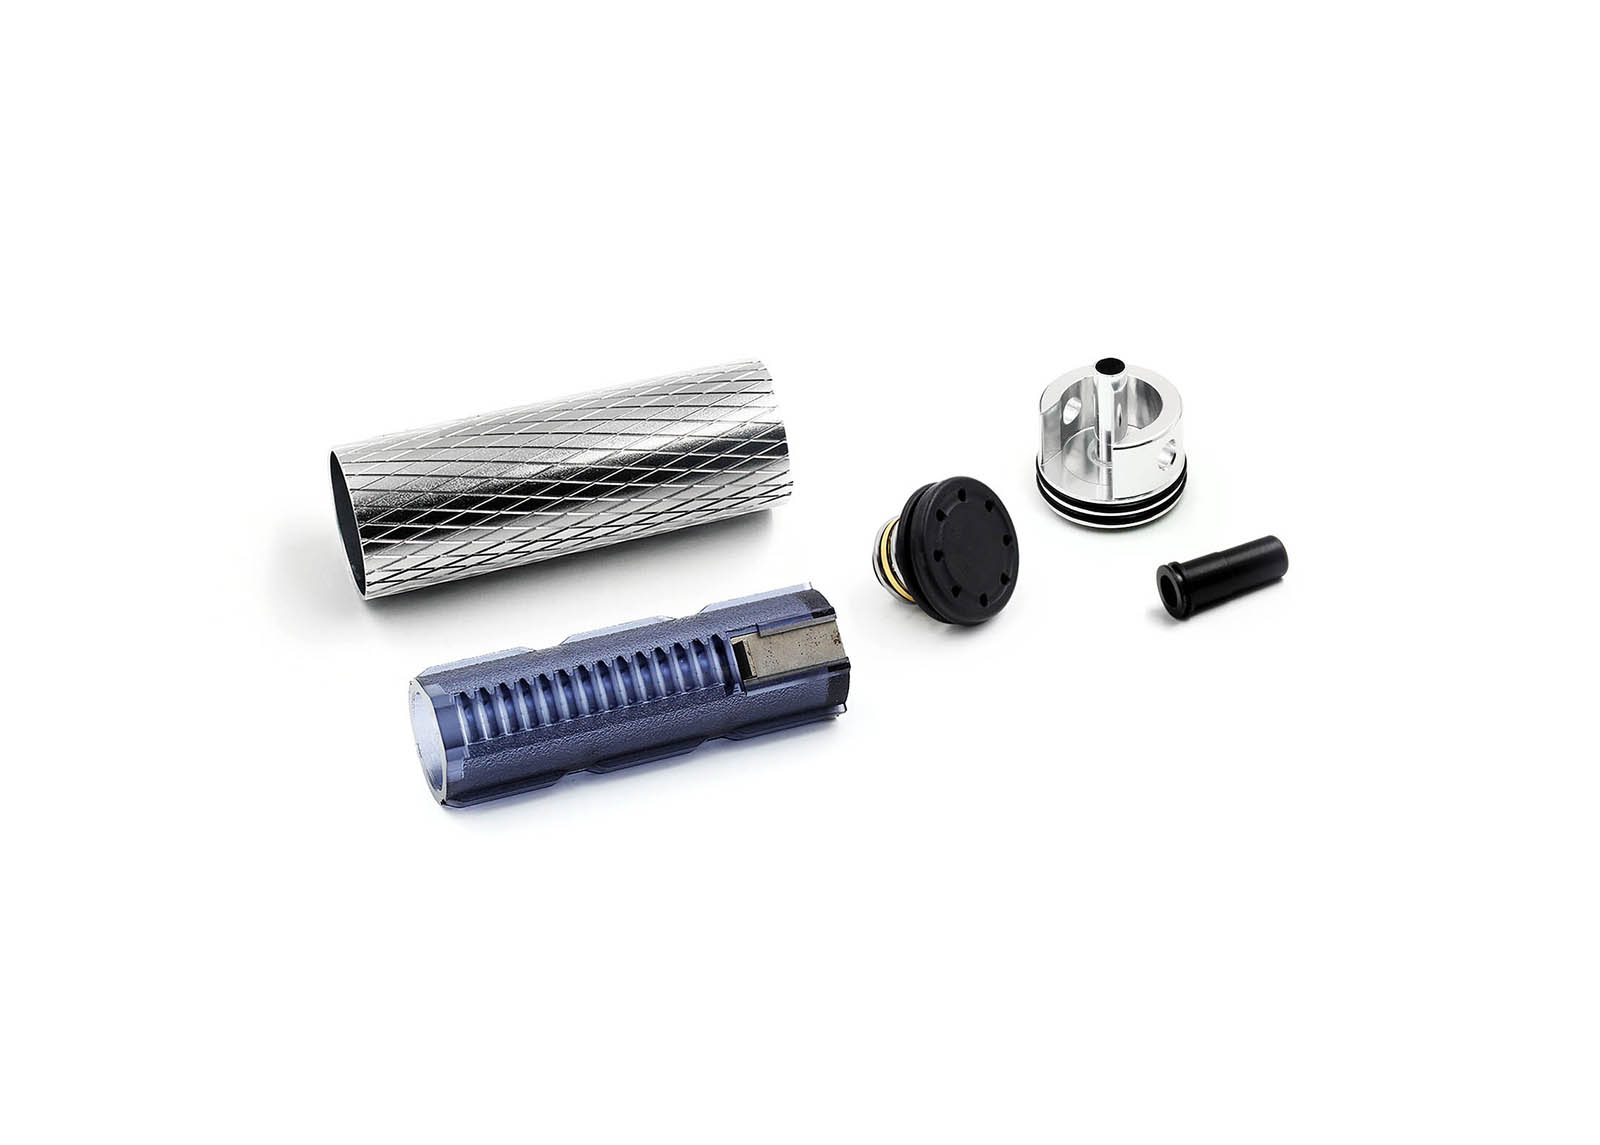 Cylinder Set for G3-A3/A4/SG1 (CA Type) - Modify AEG Airsoft parts